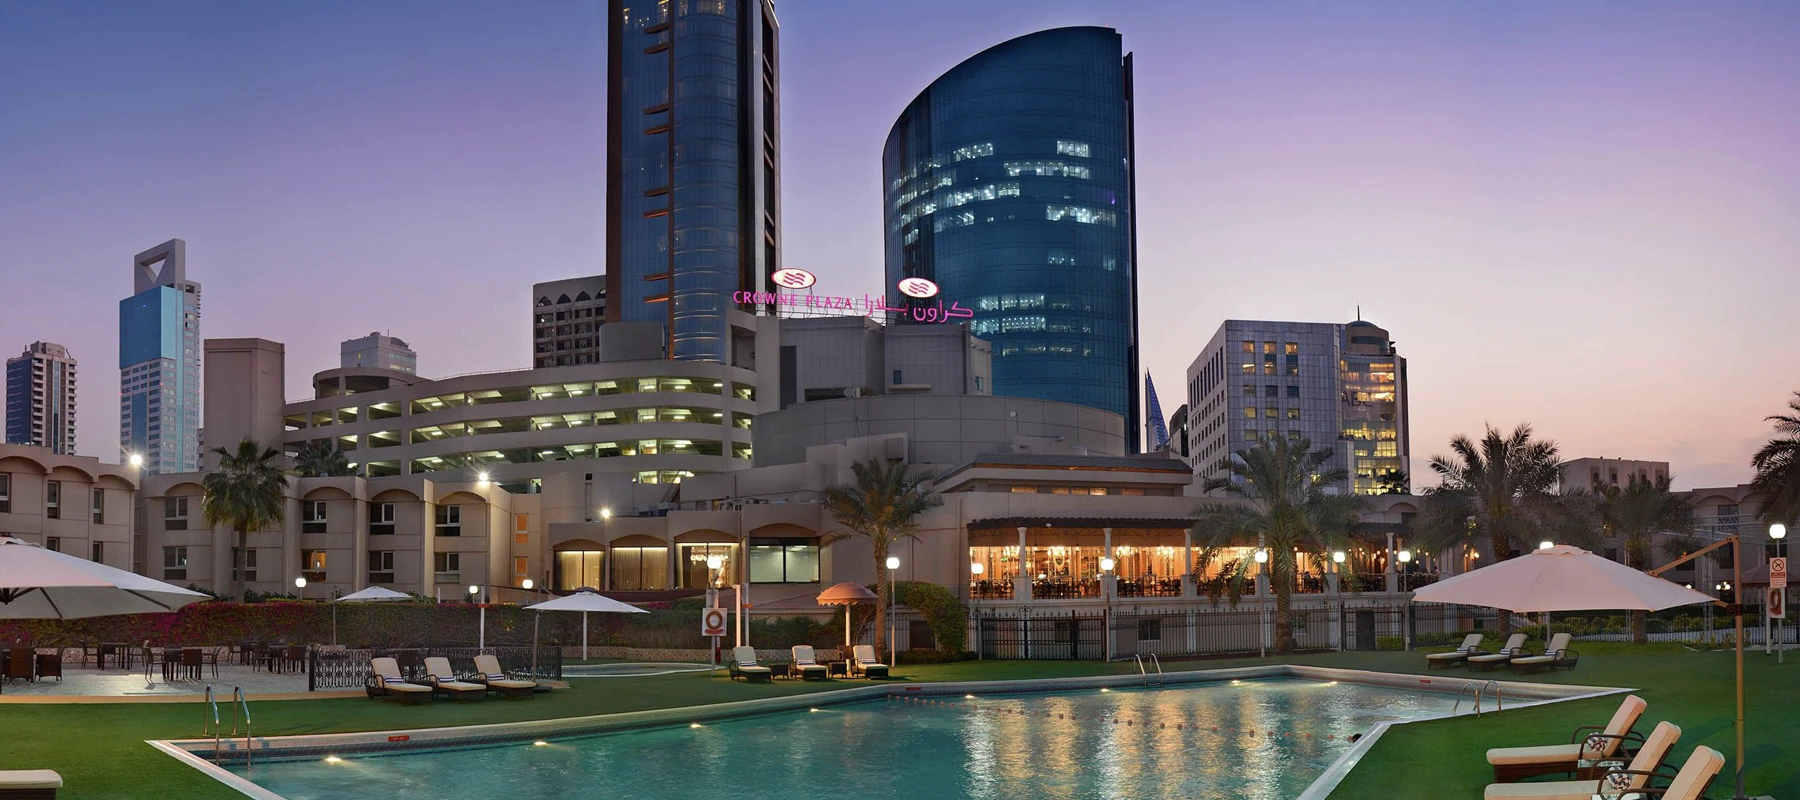 Featured image for “Crowne Plaza”